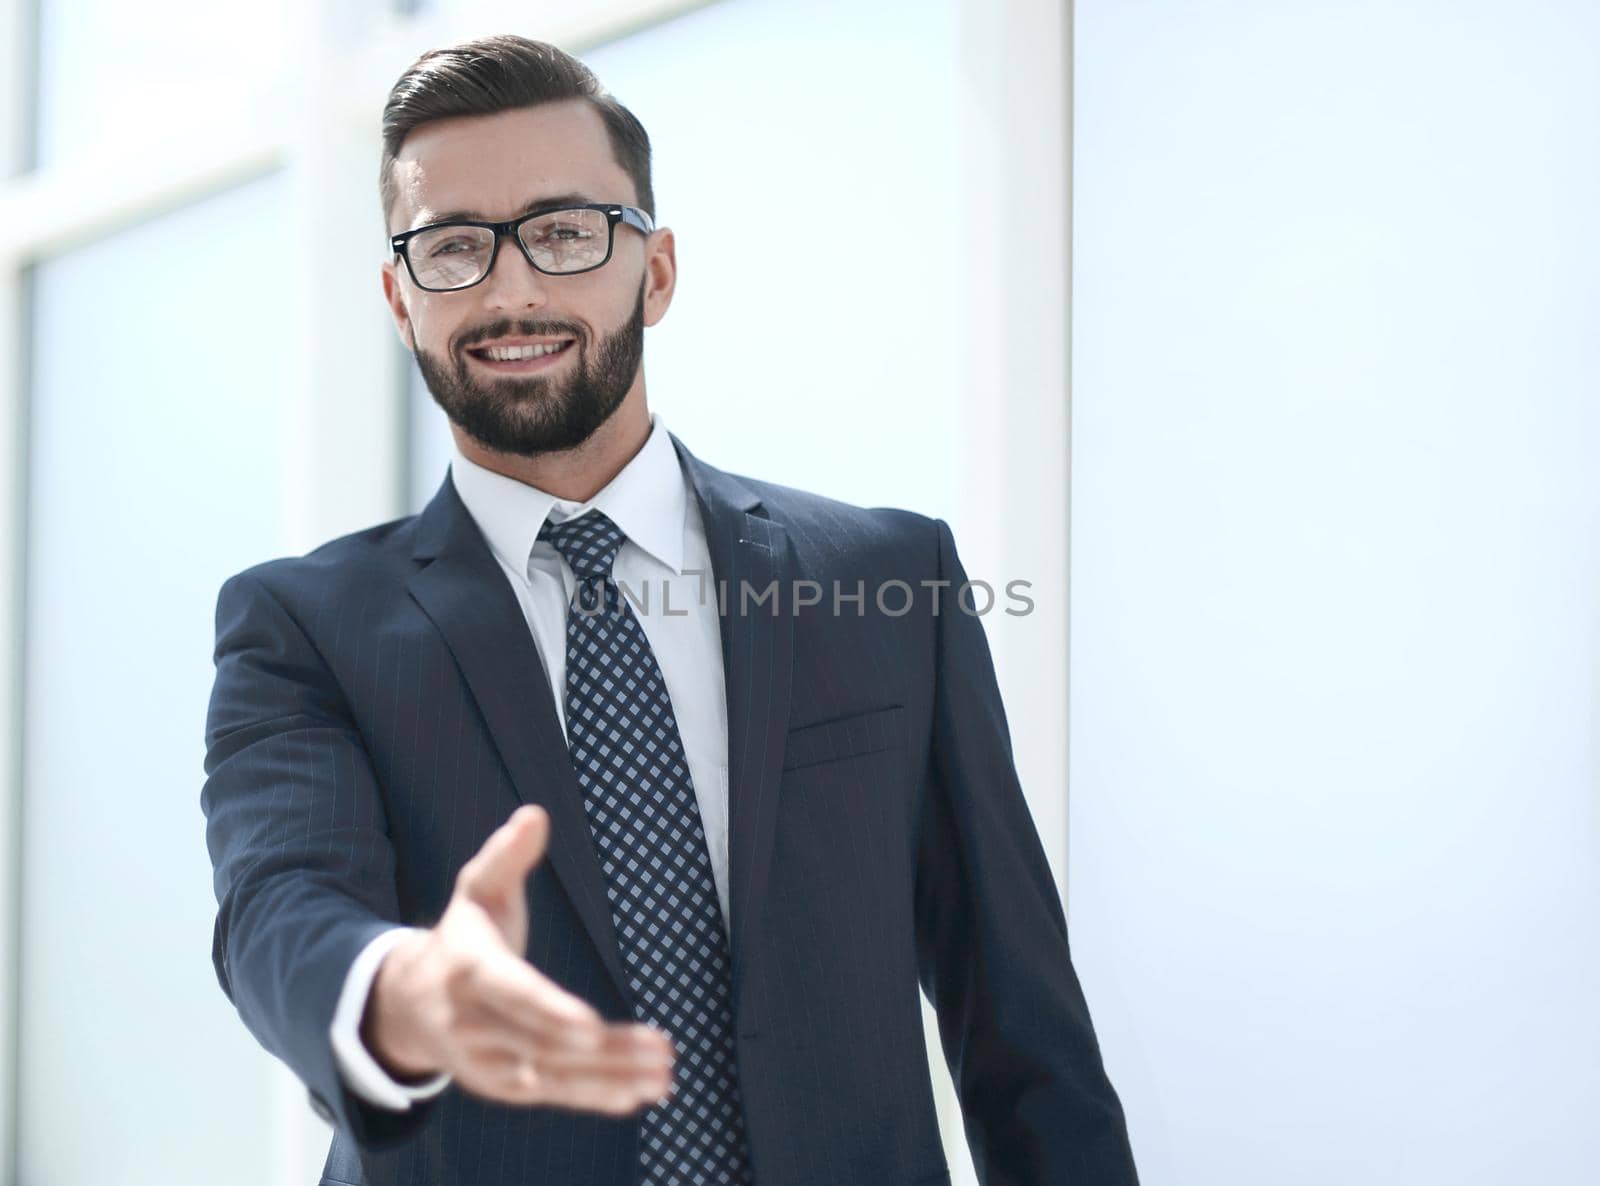 successful businessman holding out his hand for a handshake .photo with copy space